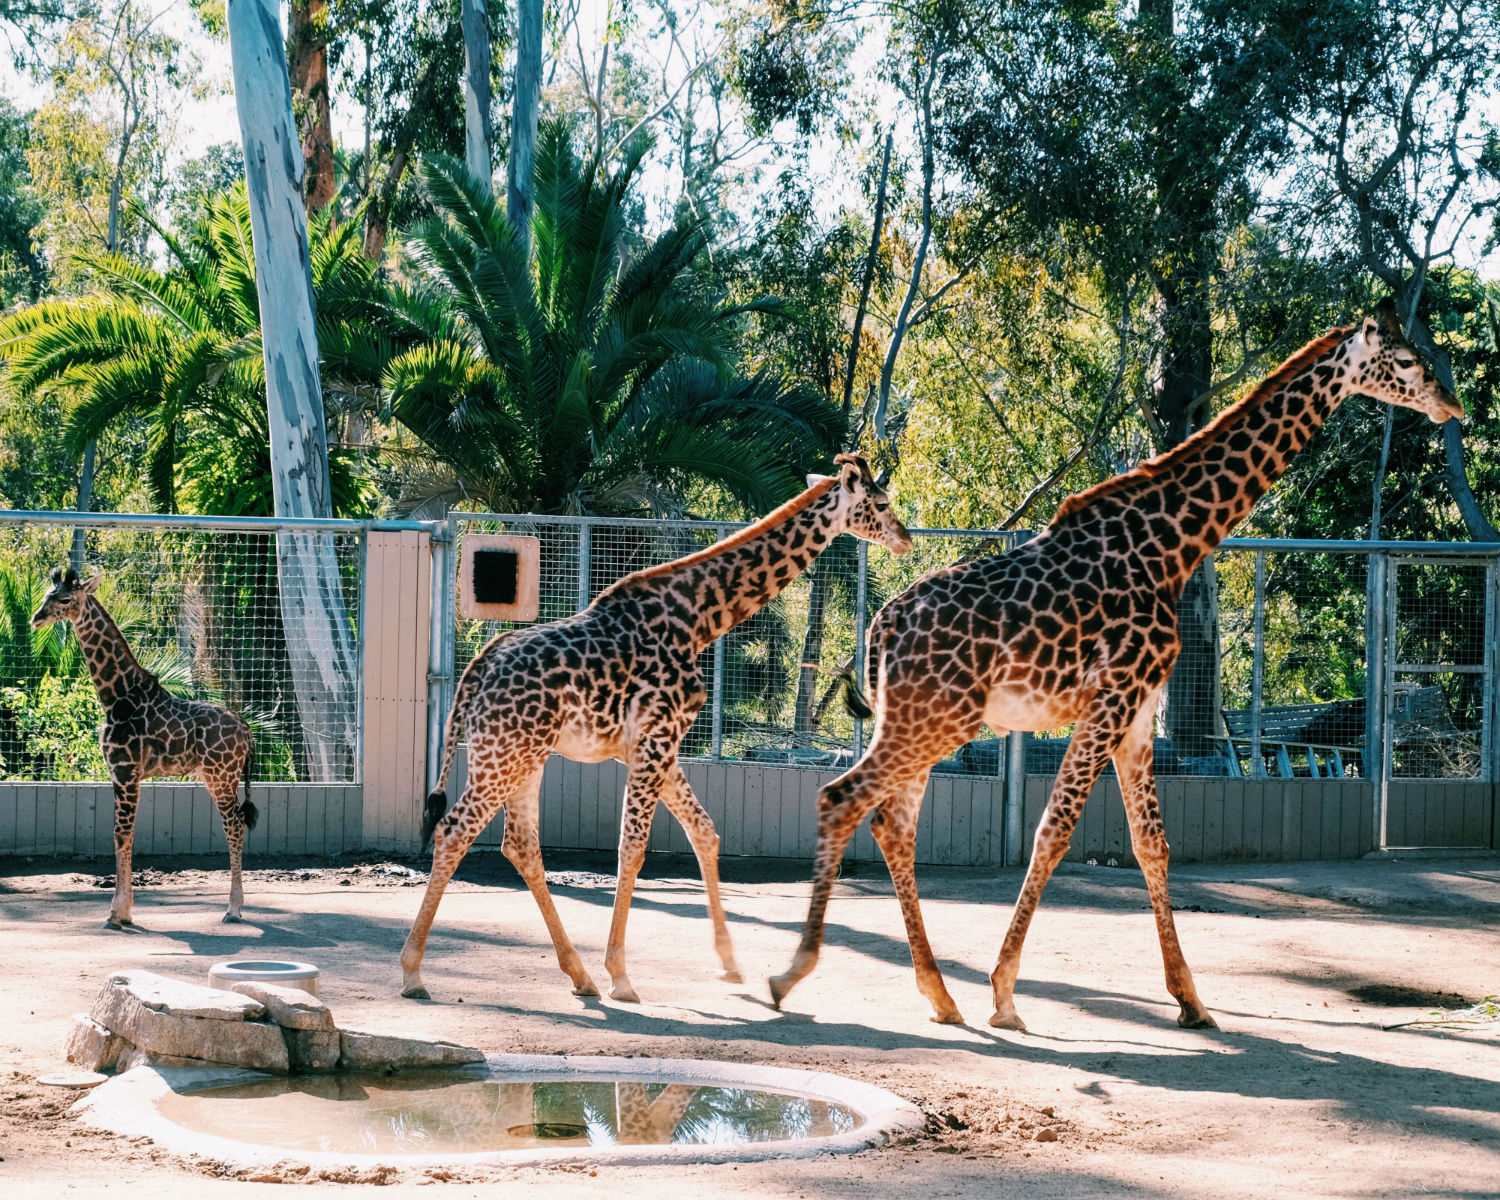 San Diego Zoo is worth the 40-minute drive from Carlsbad.